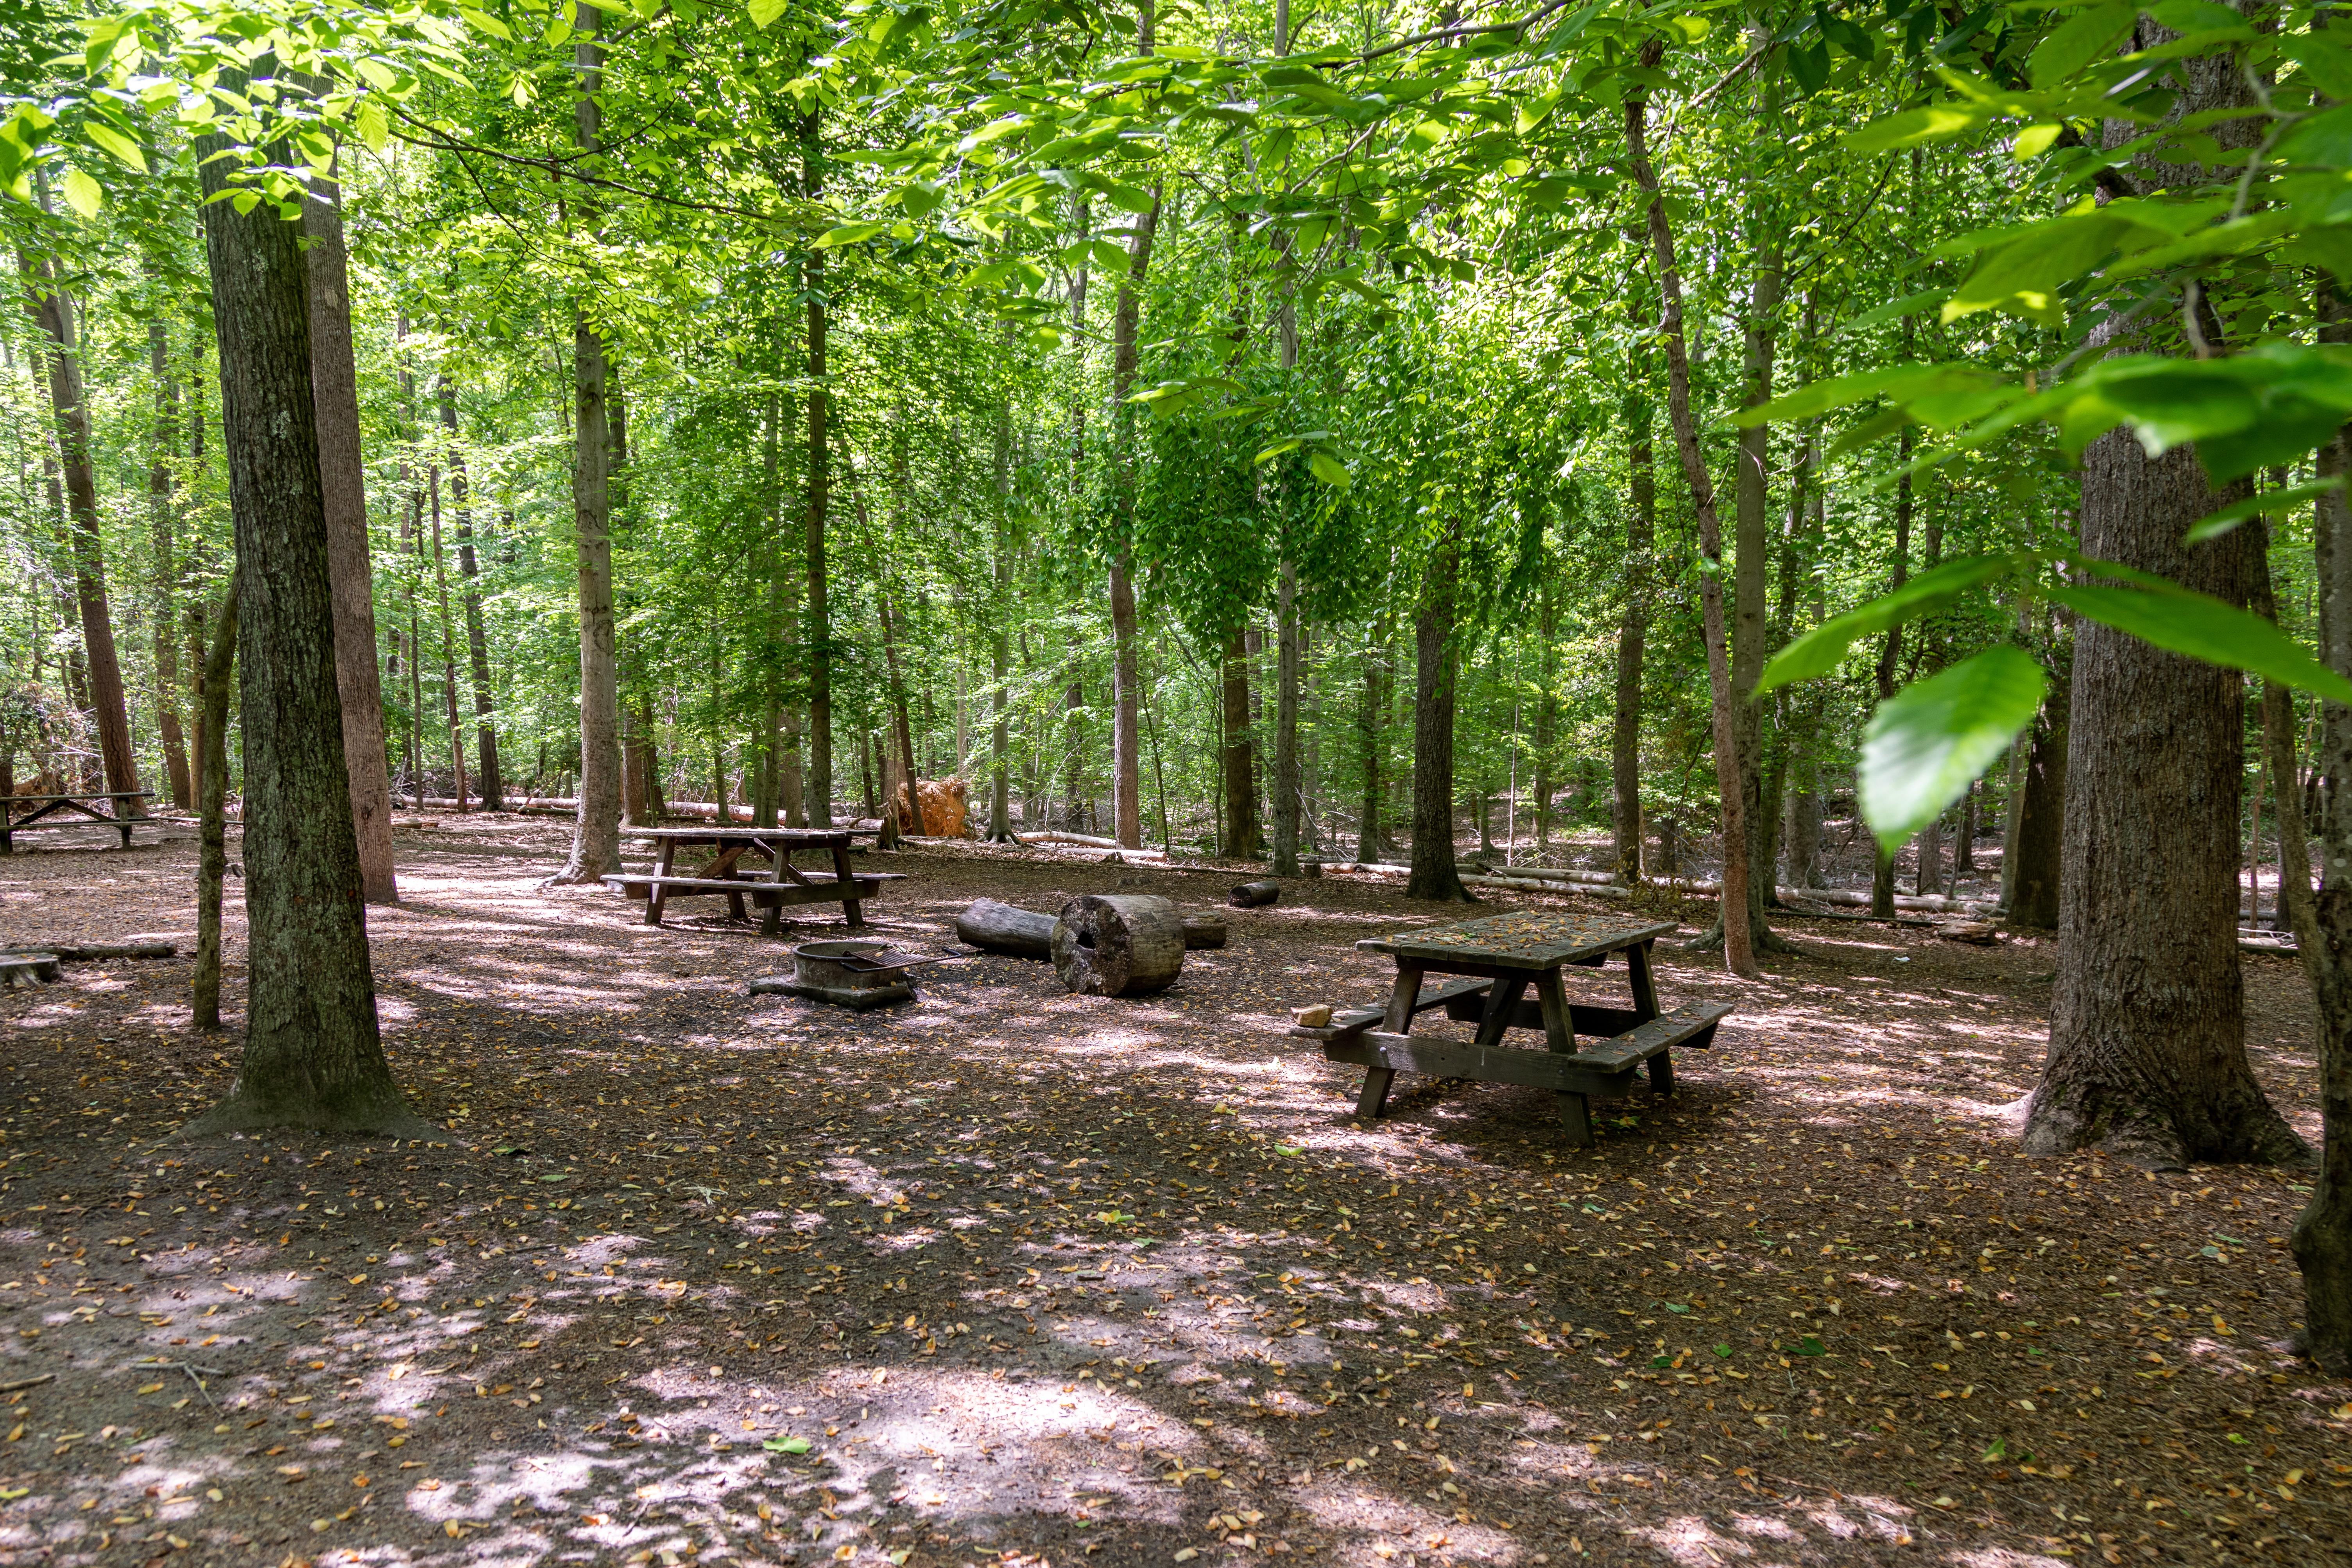 Brown picnic tables and a fire ring are surrounded by green trees